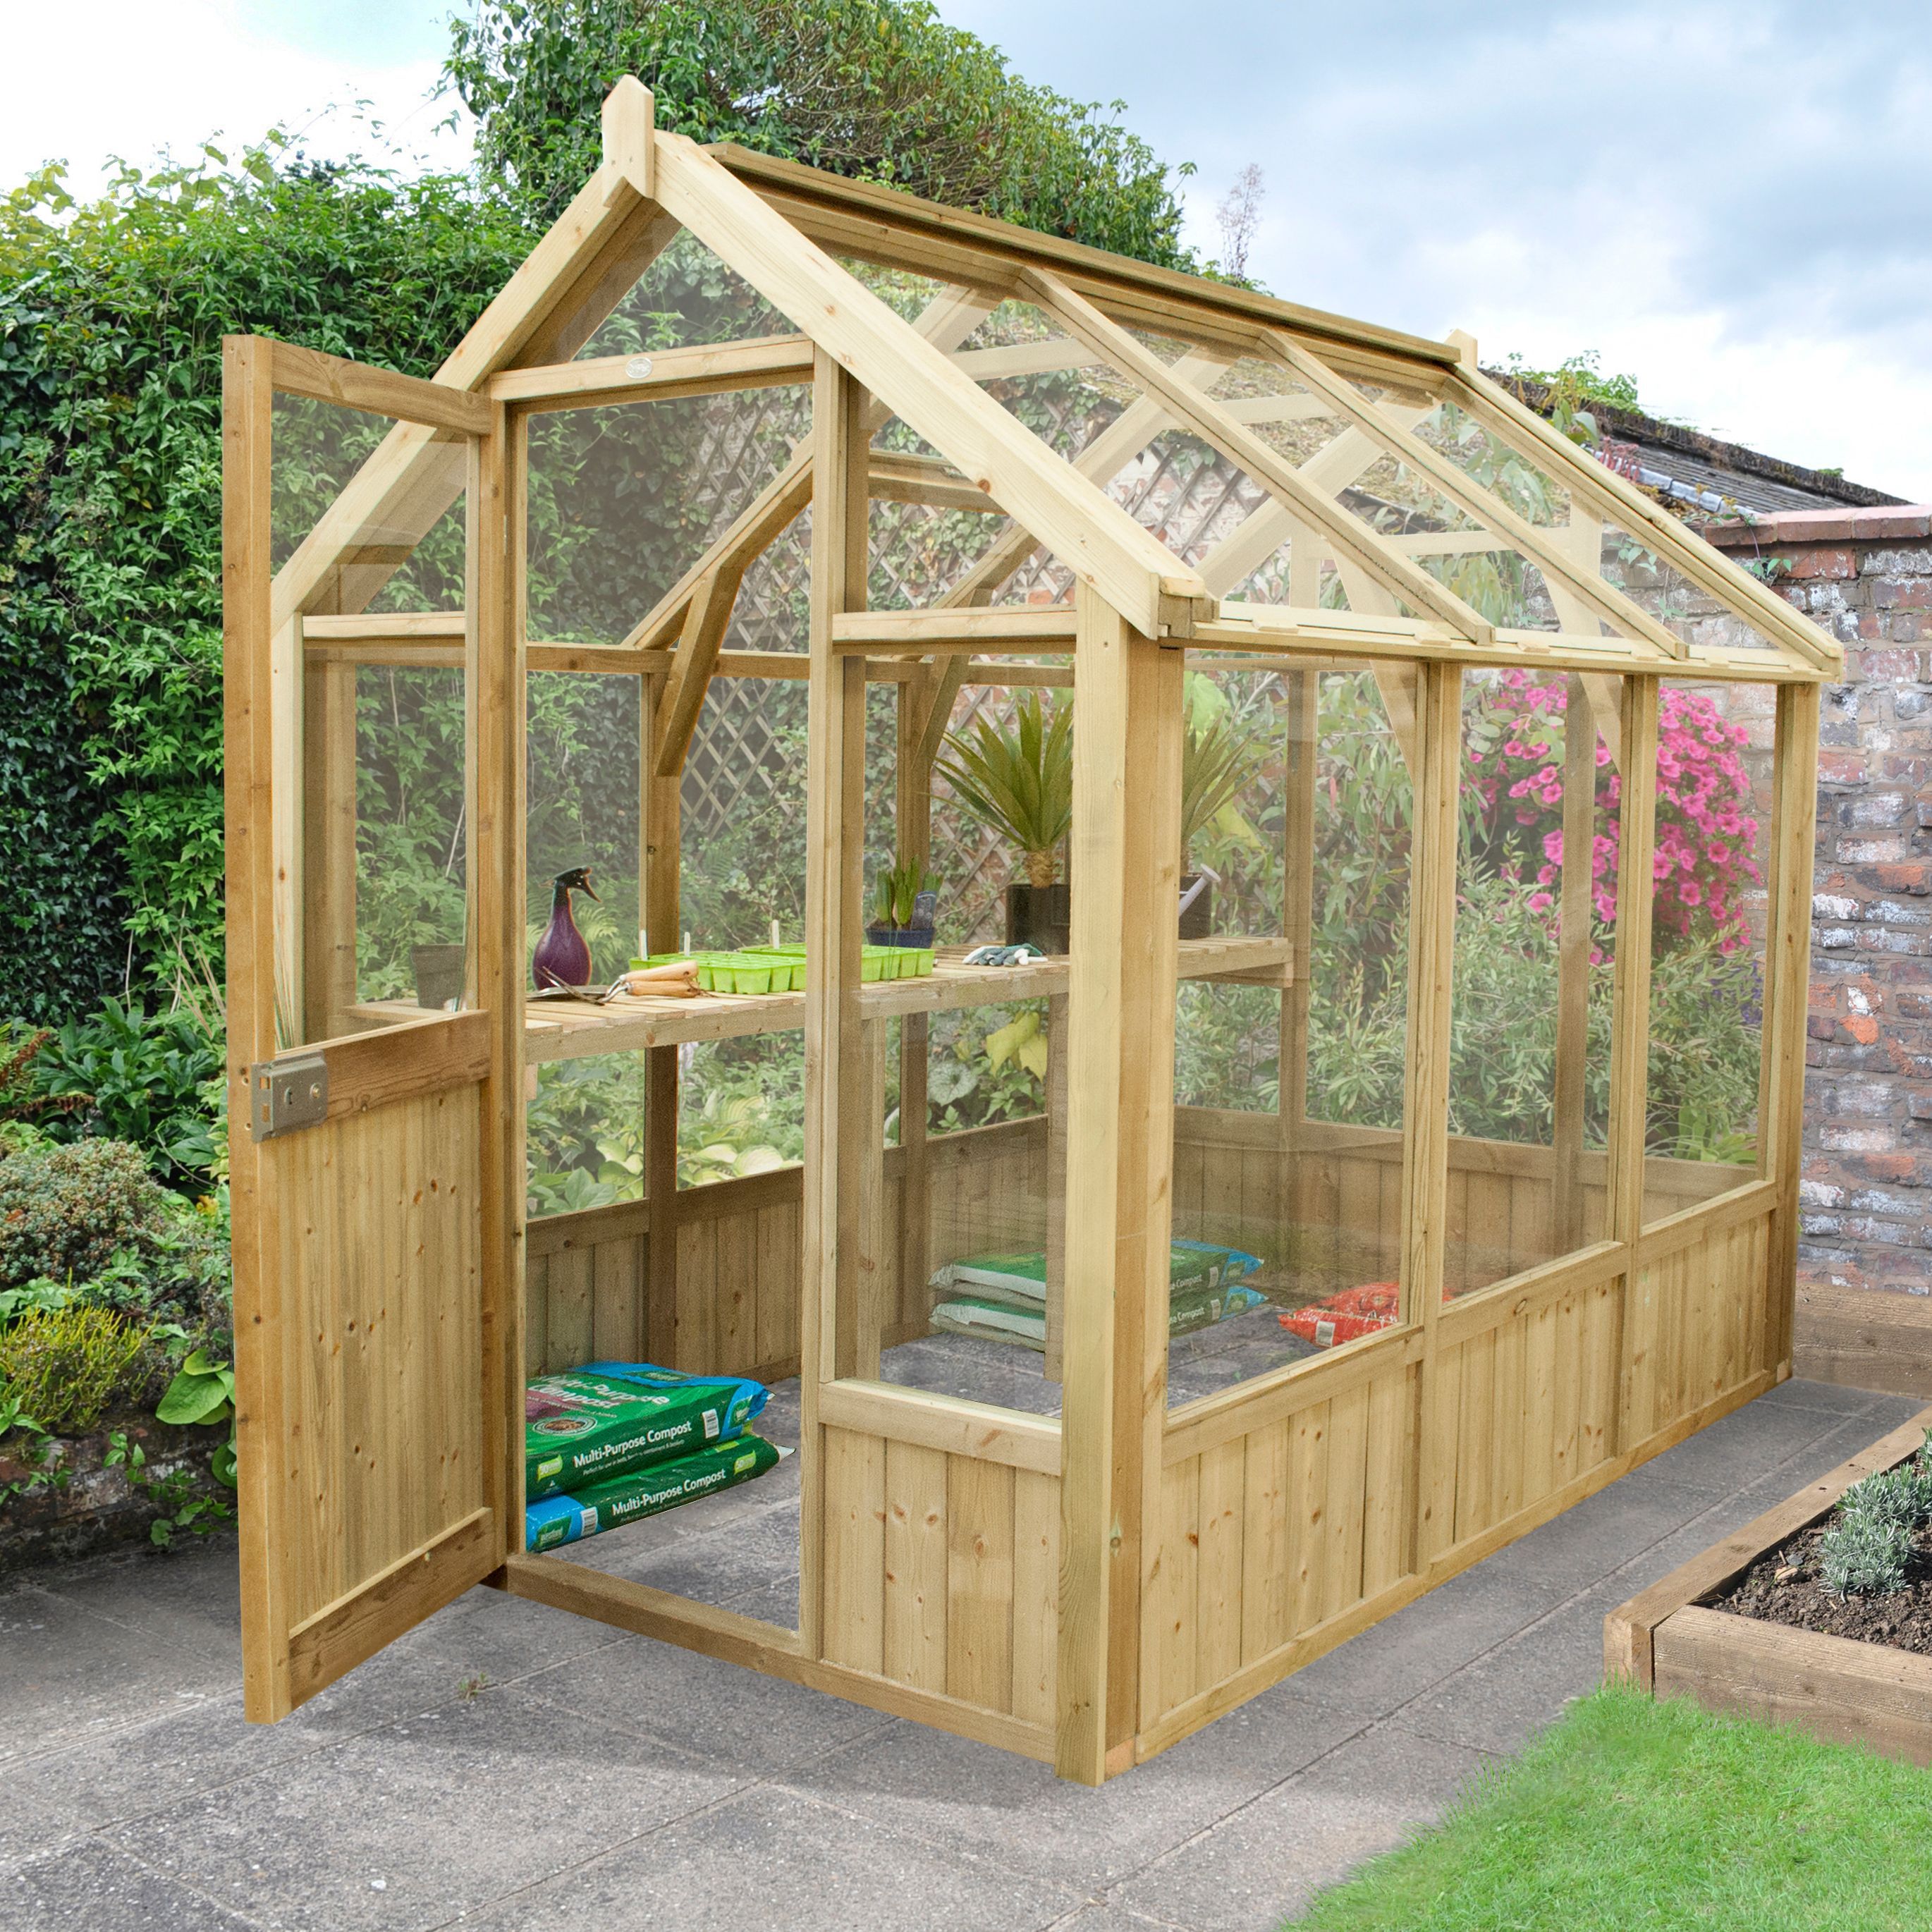 Forest Garden Vale Wooden 8x6 Toughened glass greenhouse ...